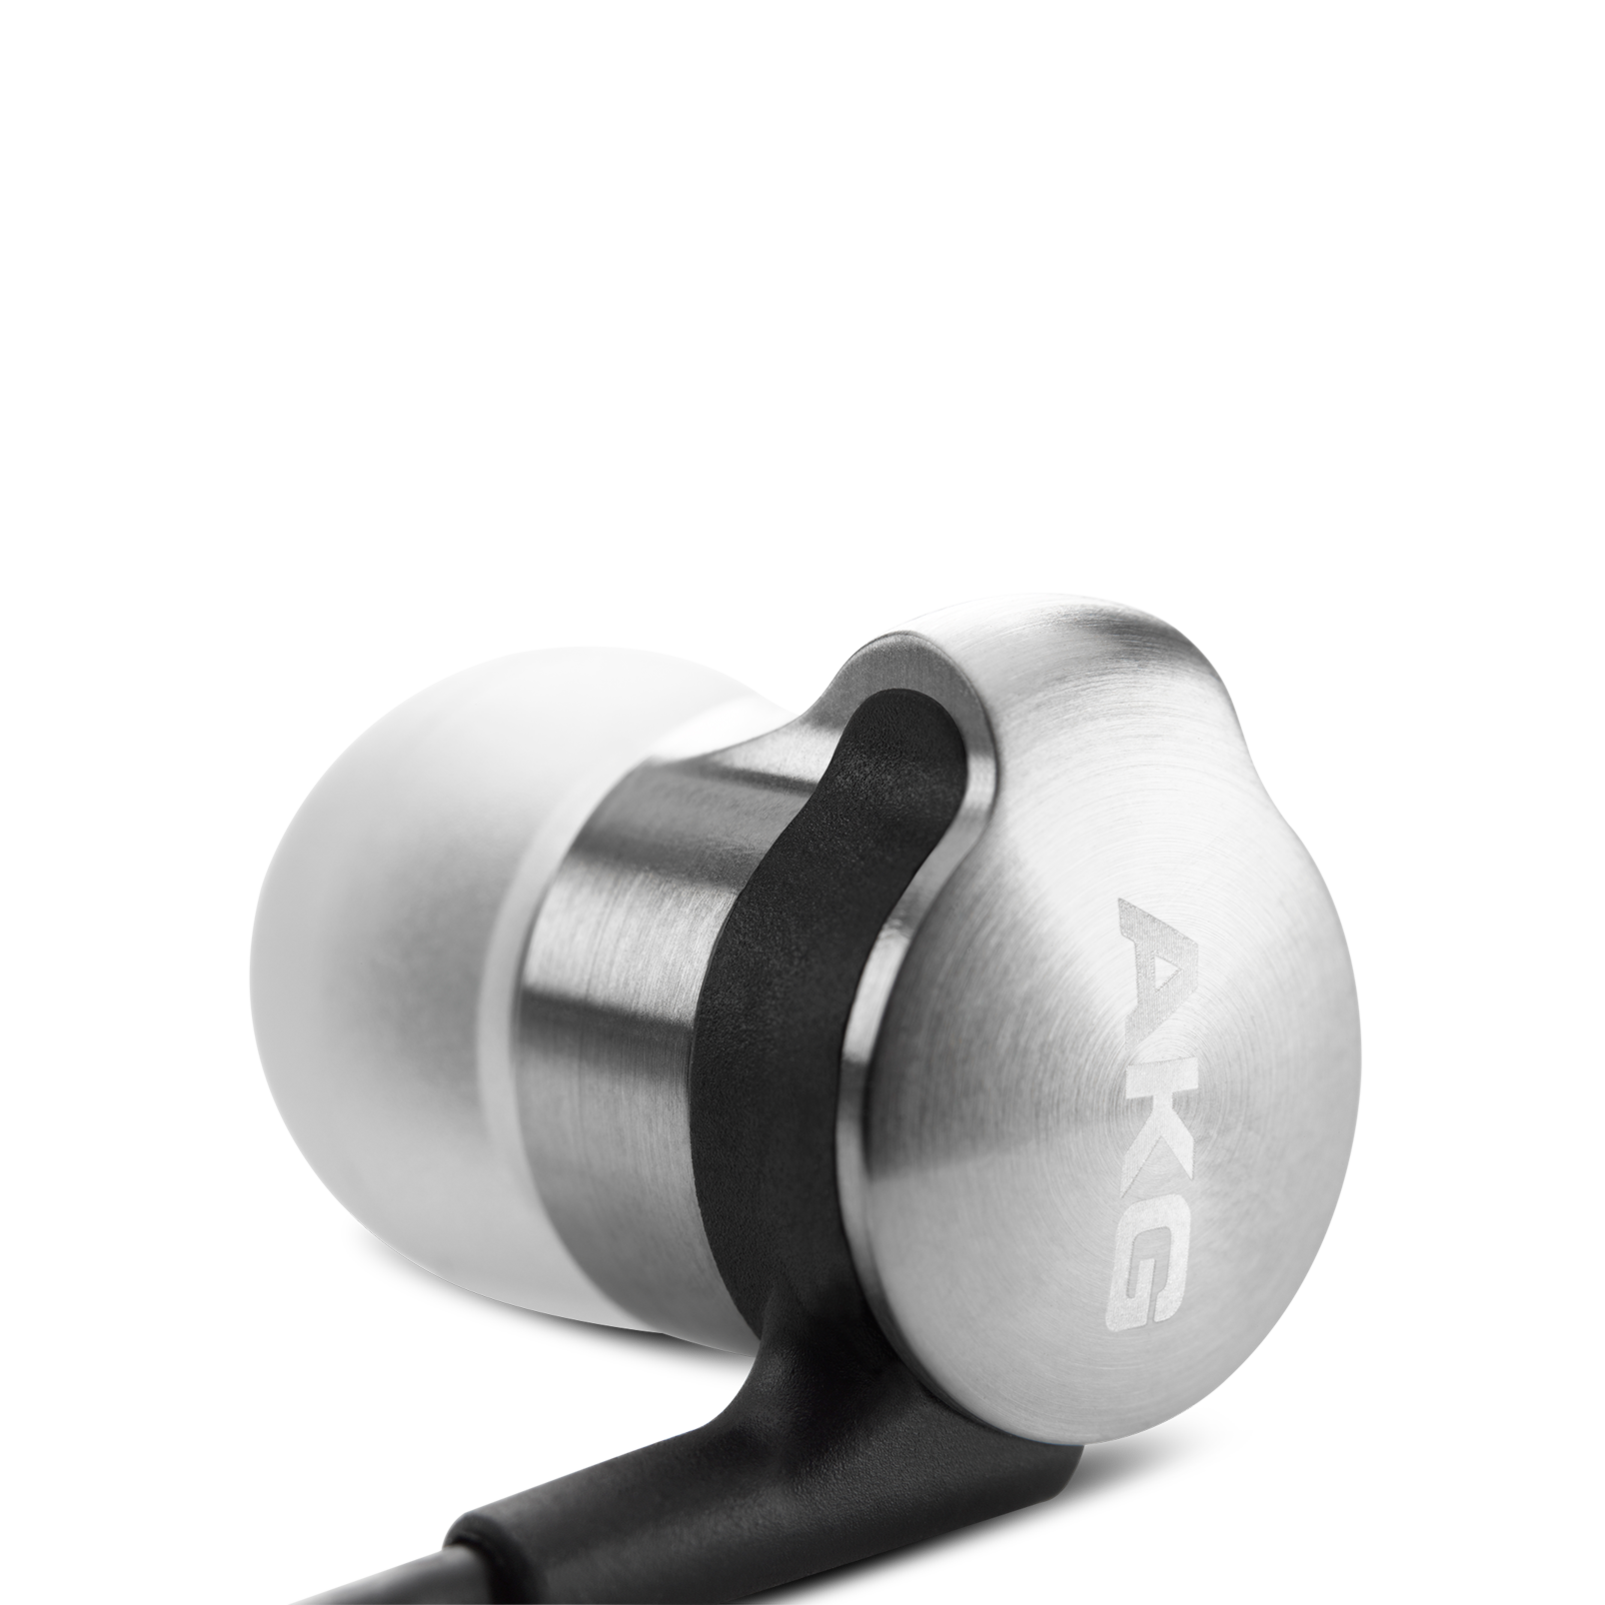 K3003 | Reference class 3-way earphones delivering AKG reference sound.